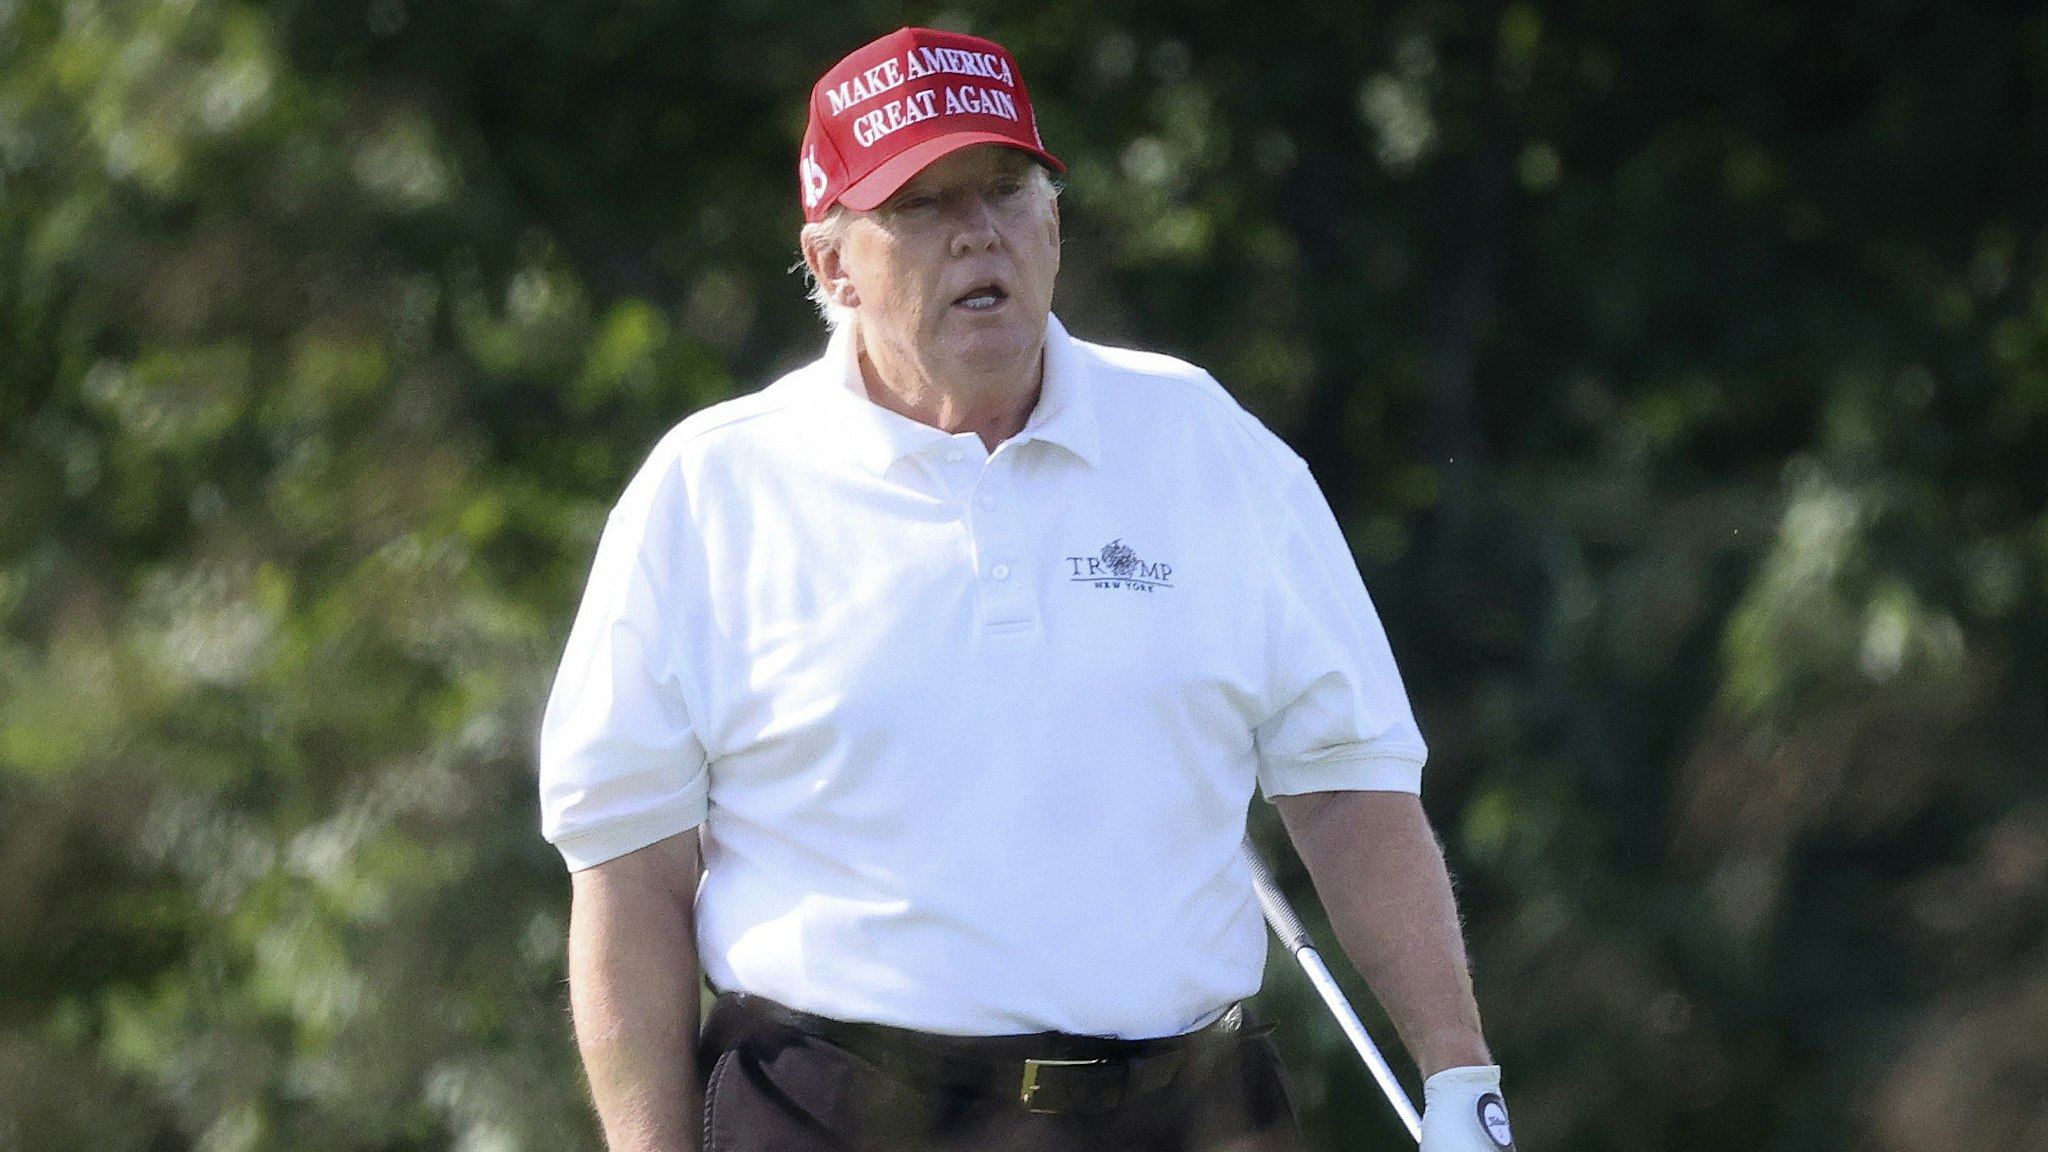 STERLING, VIRGINIA - SEPTEMBER 13: Former U.S. President Donald Trump golfs at Trump National Golf Club September 13, 2022 in Sterling, Virginia. Trump's legal team is currently negotiating with the Justice Department regarding the selection of a Special Master to review documents seized when the FBI searched Mar-a-Lago.